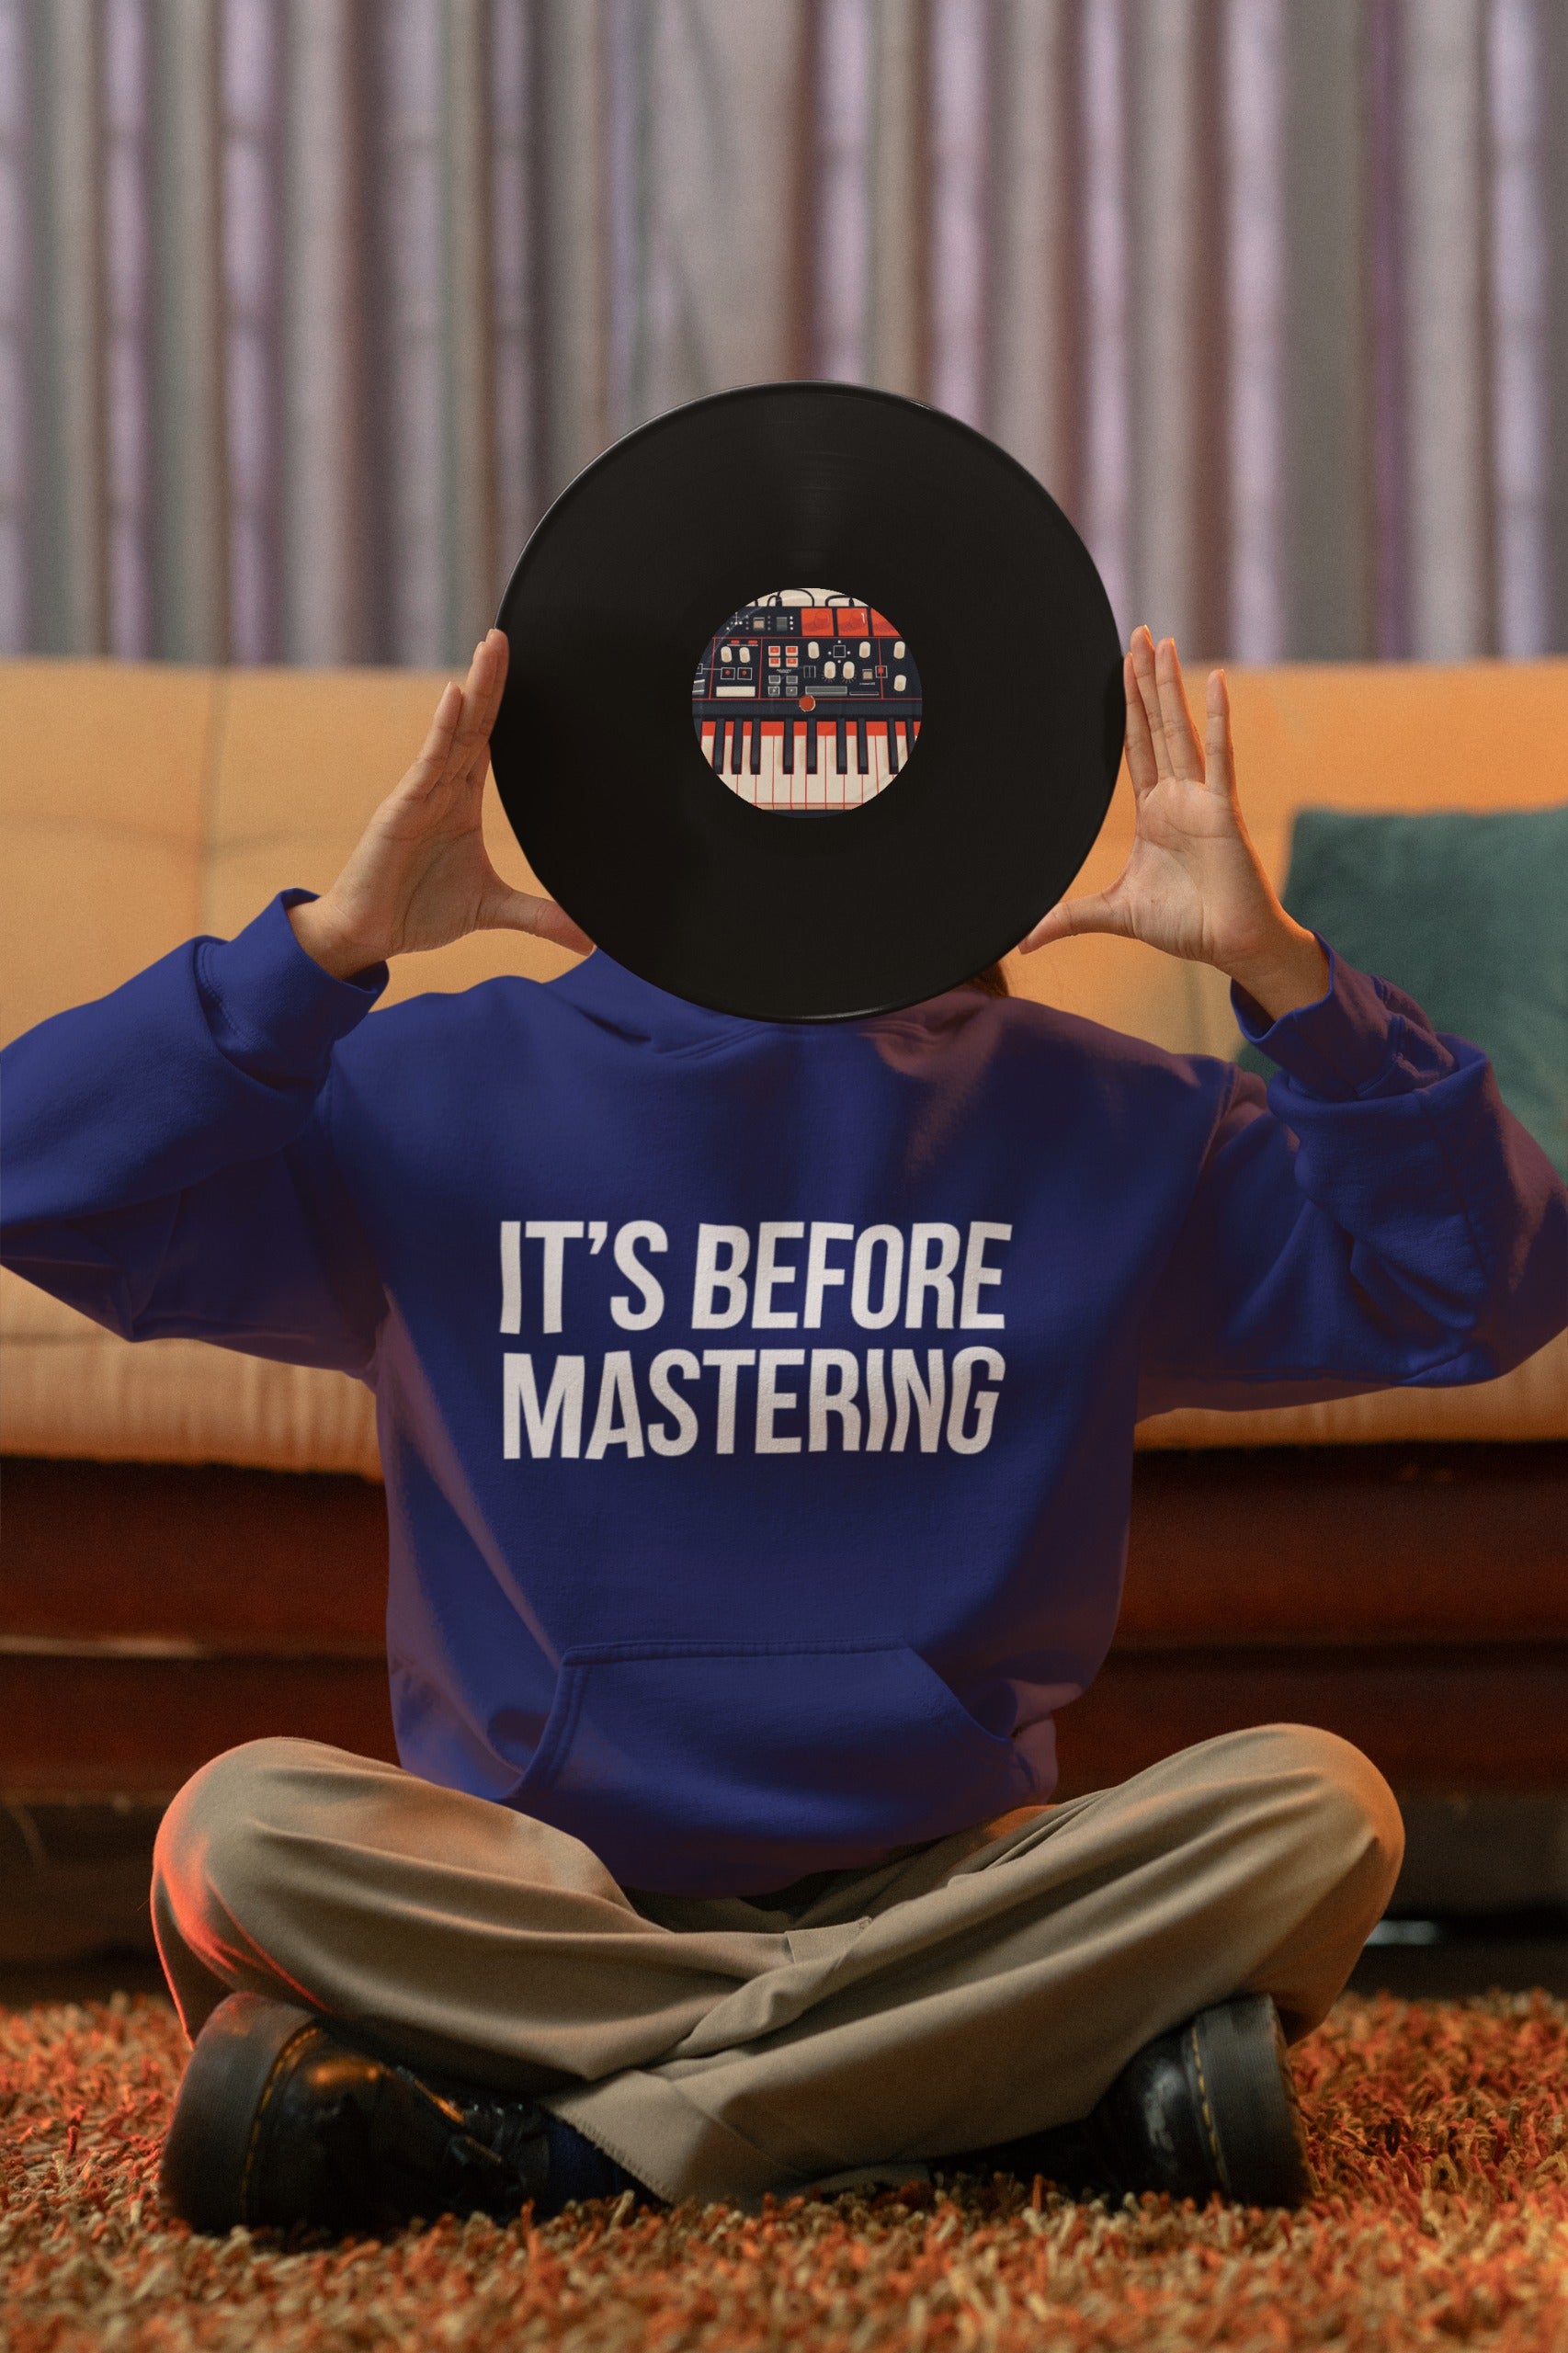 Person in a blue sweatshirt that reads "IT'S BEFORE MASTERING," sitting cross-legged on the floor, playfully holding a vinyl record that covers their face against a cozy room background.